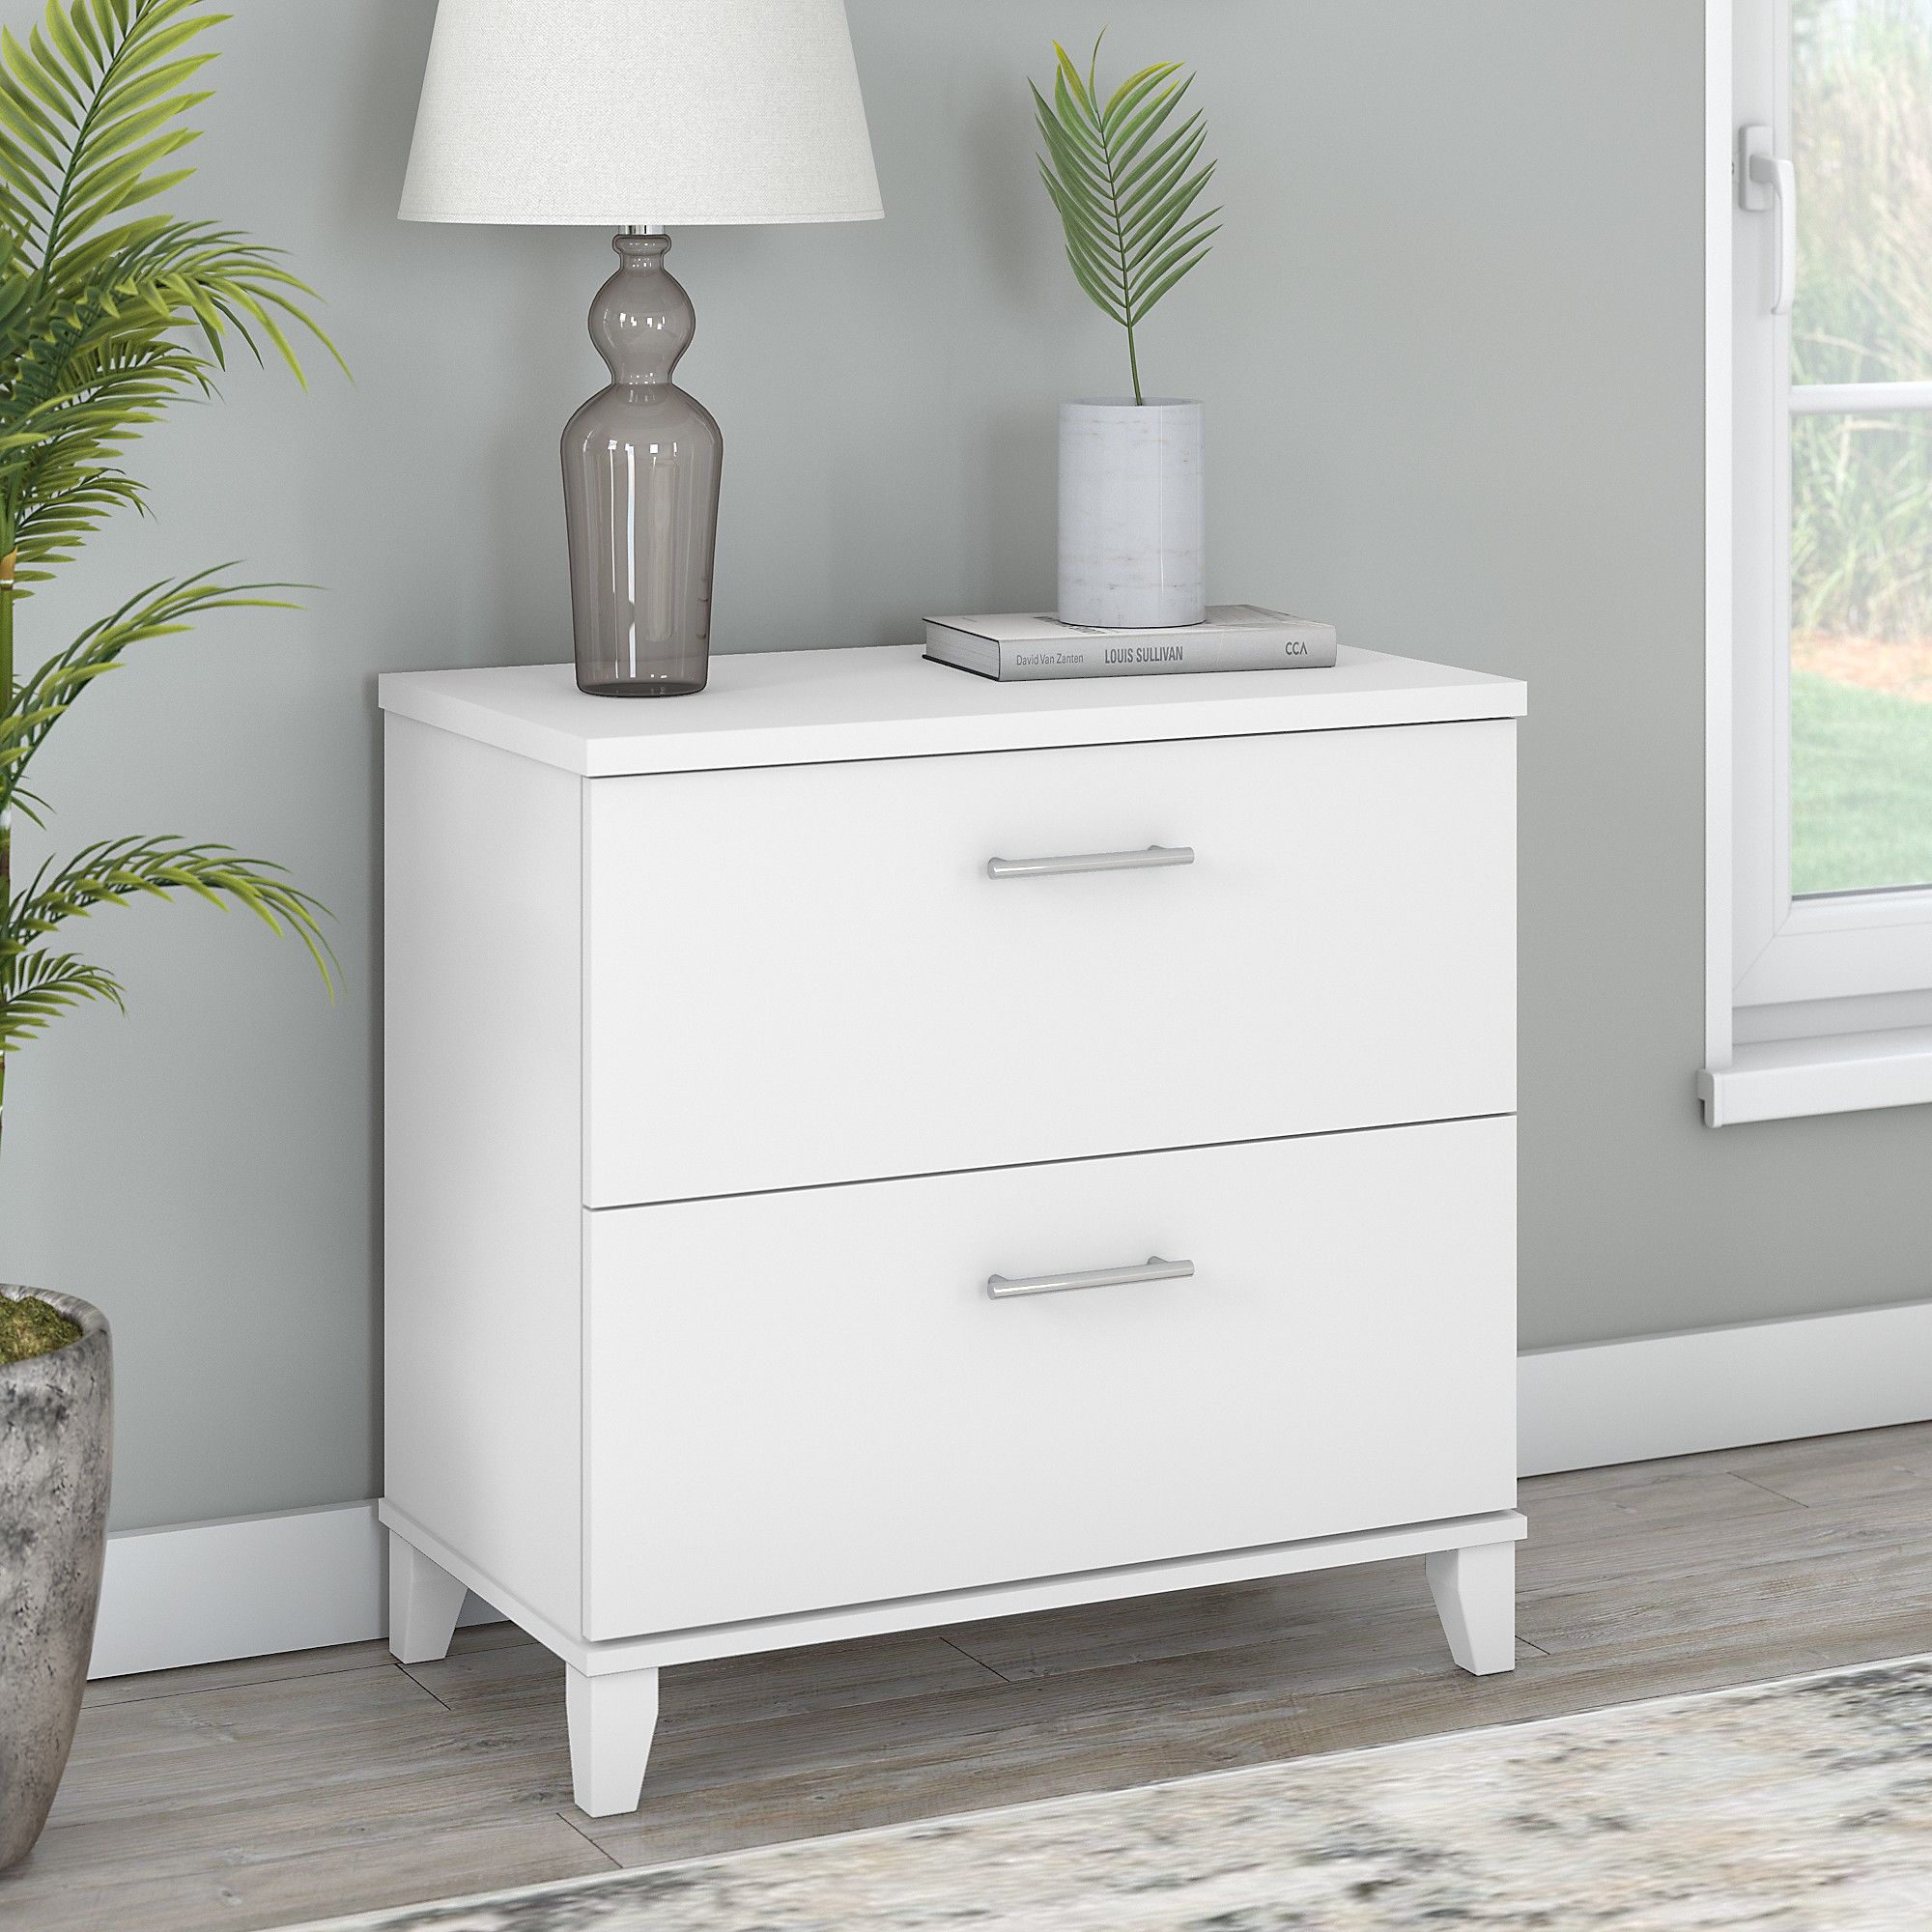 2 Drawer Lateral File Cabinet in White by Bush